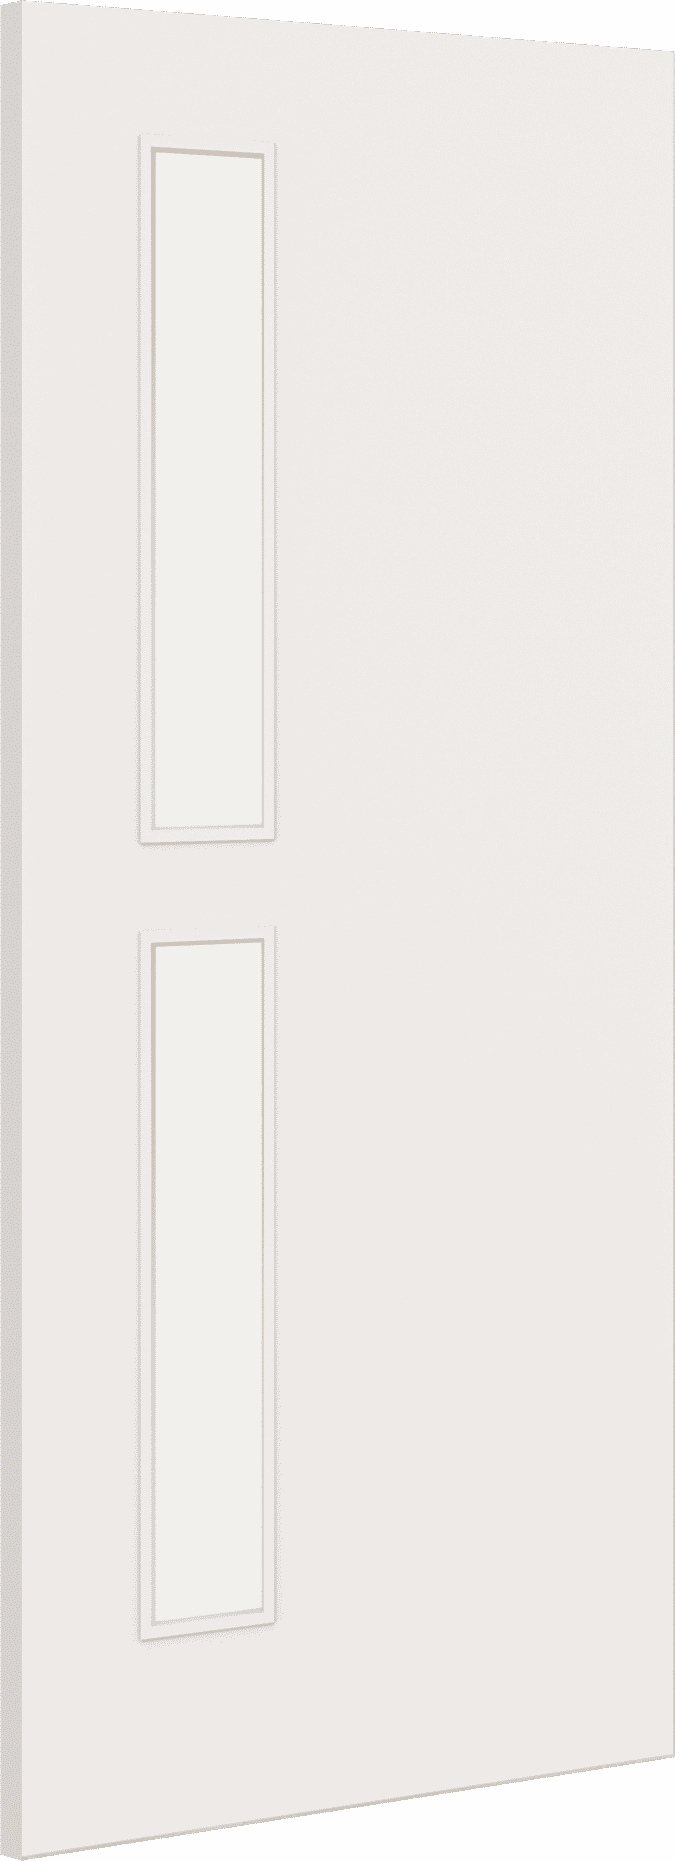 1981mm x 762mm x 44mm (30") Architectural Paint Grade White 07 Frosted Glazed Fire Door Blank